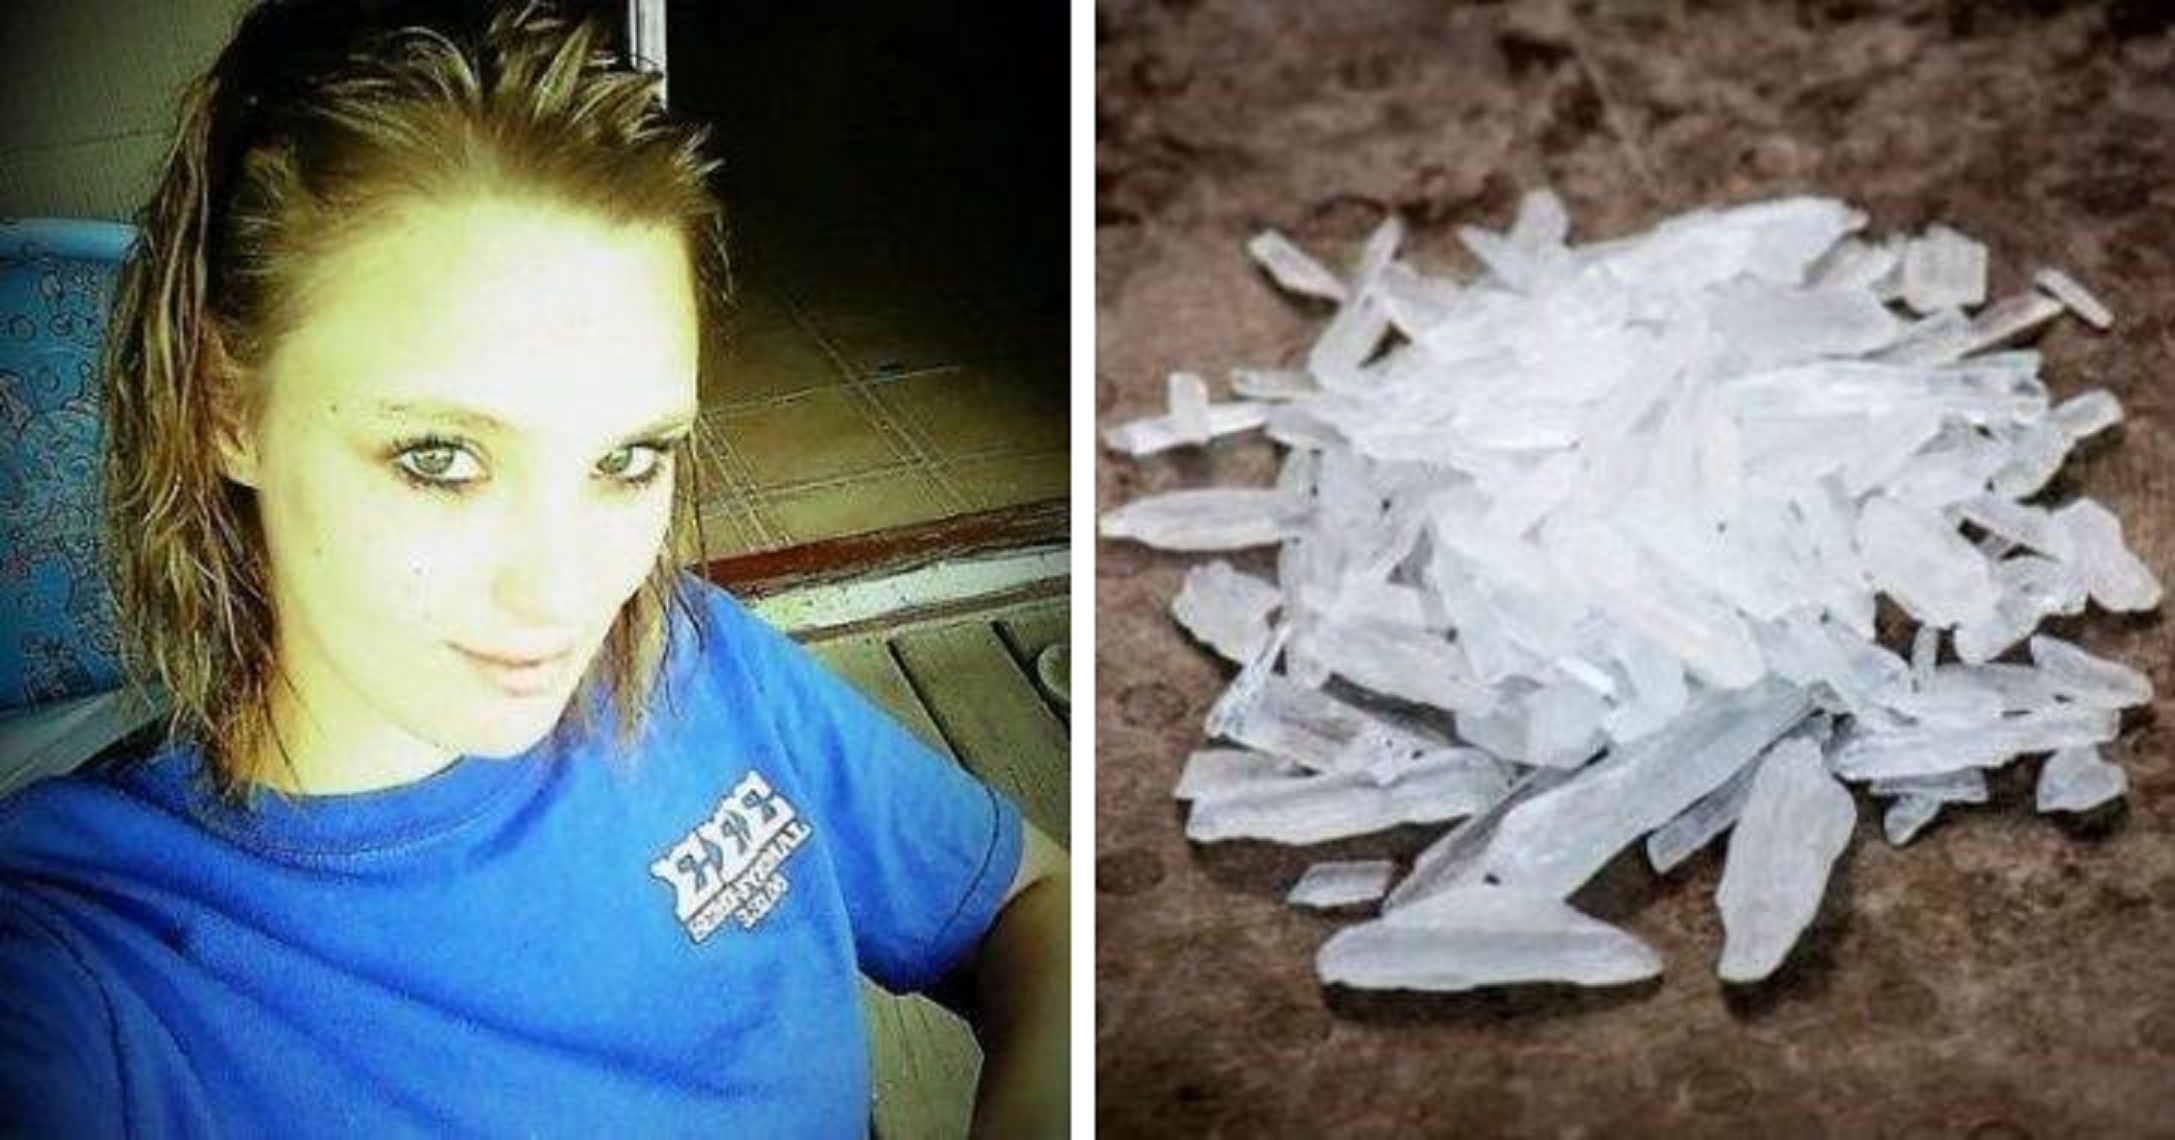 Woman Caught With 1gm Of Meth in her Vagina, Says She Doesn’t Know How It Got There